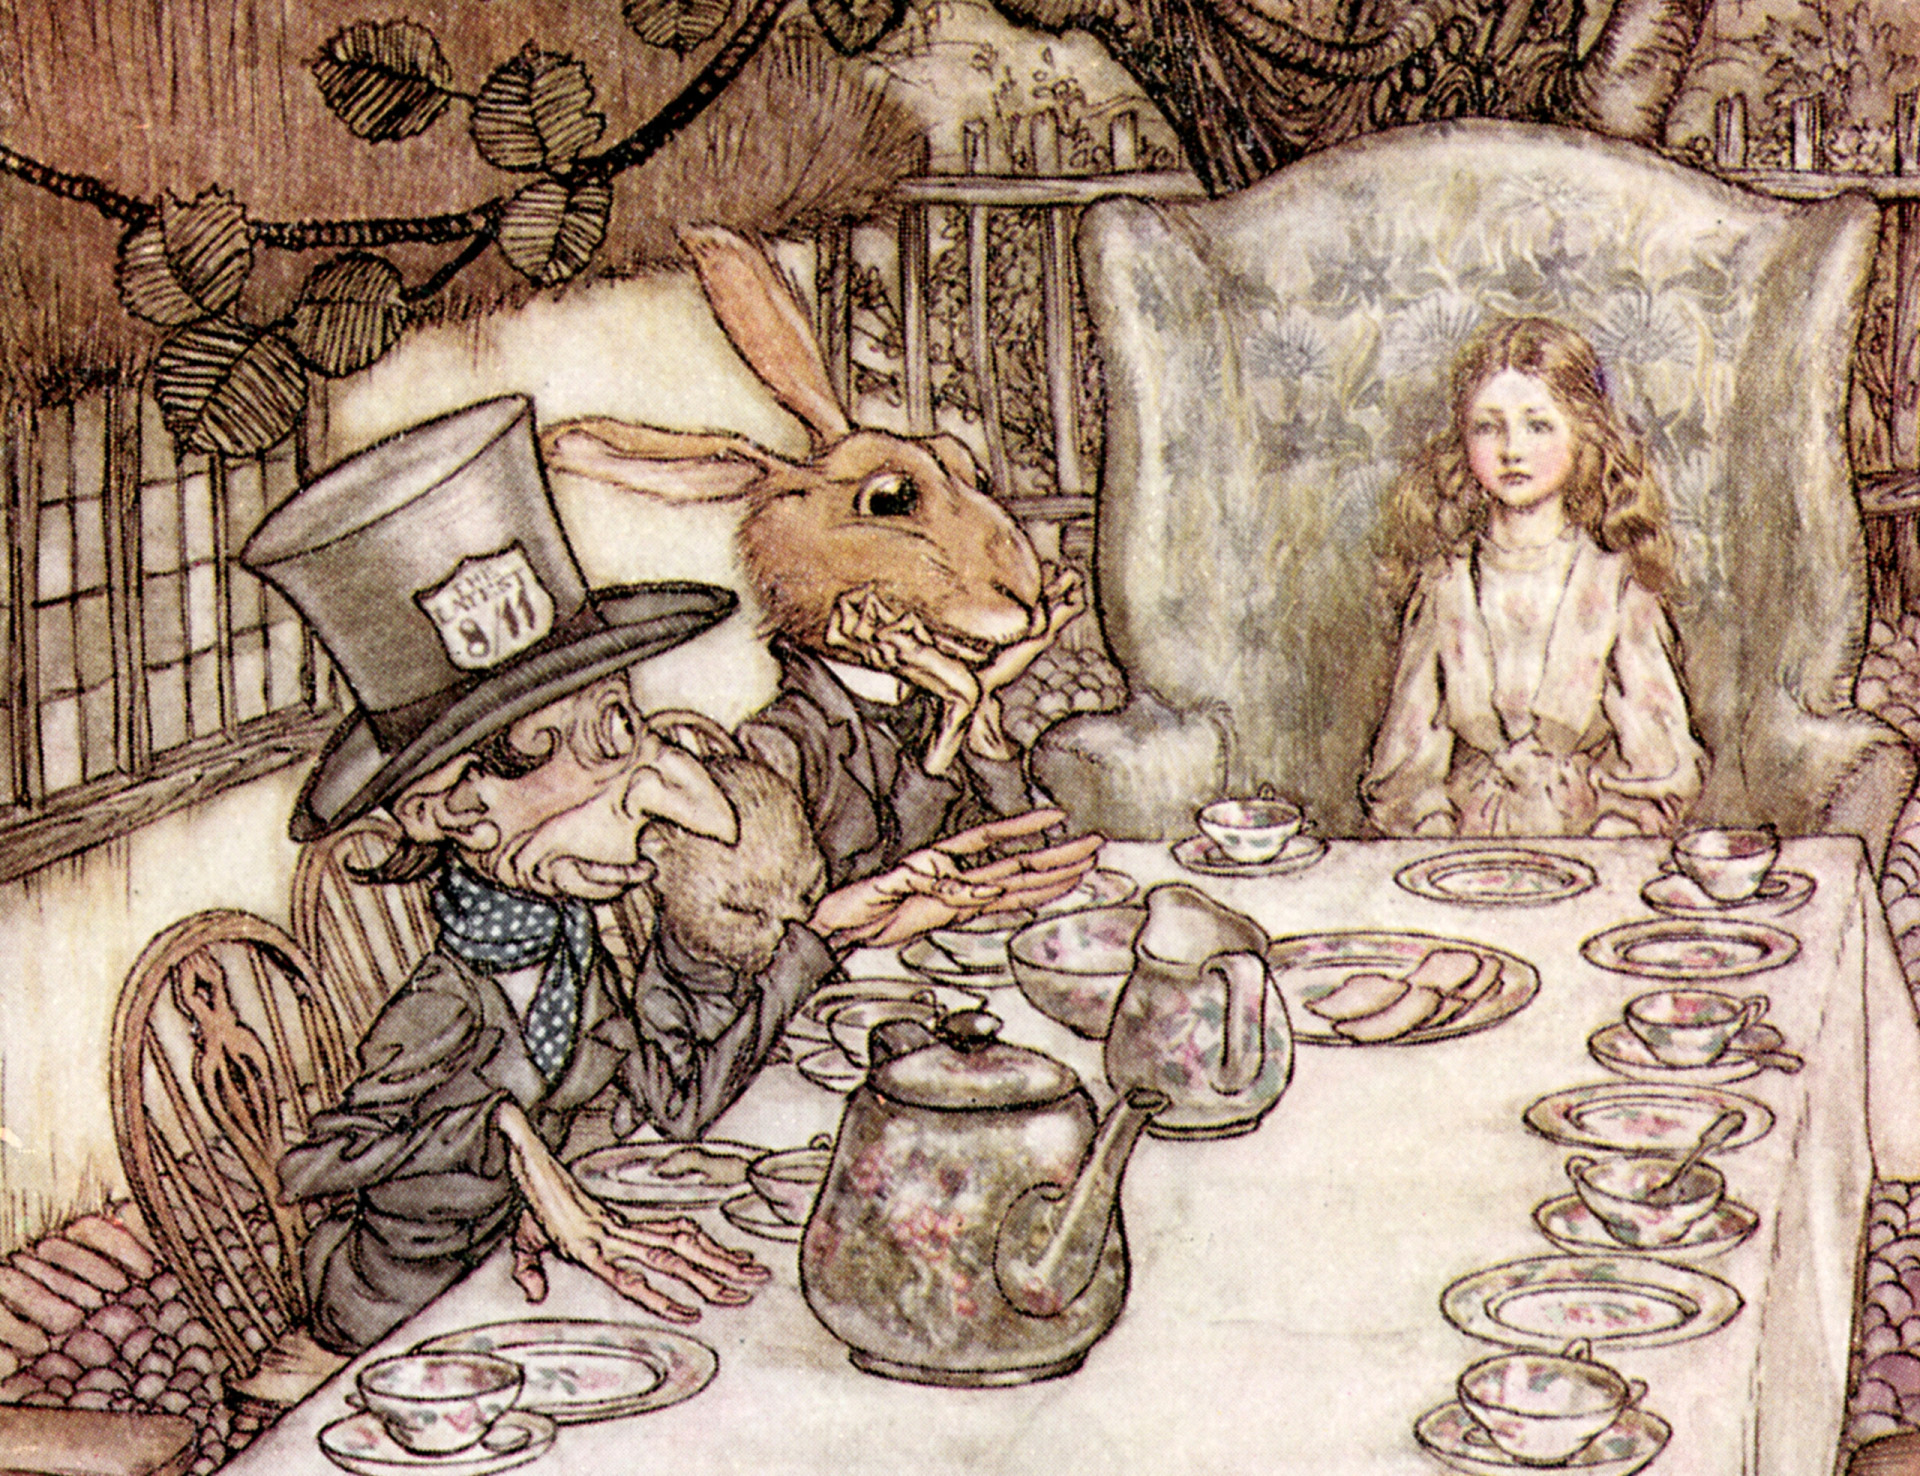 <p>The madcap hilarity of the Hatter's tea party is a key scene in the novel. The gathering can be seen as members of society behaving beyond social constraints. The Hatter is quite often very rude and provokes Alice during the party. Confrontation is the overriding theme. Carroll is reminding us that human interaction is dependent on a mutual openness and respect from all parties involved.</p><p><a href="https://www.msn.com/en-us/community/channel/vid-7xx8mnucu55yw63we9va2gwr7uihbxwc68fxqp25x6tg4ftibpra?cvid=94631541bc0f4f89bfd59158d696ad7e">Follow us and access great exclusive content every day</a></p>